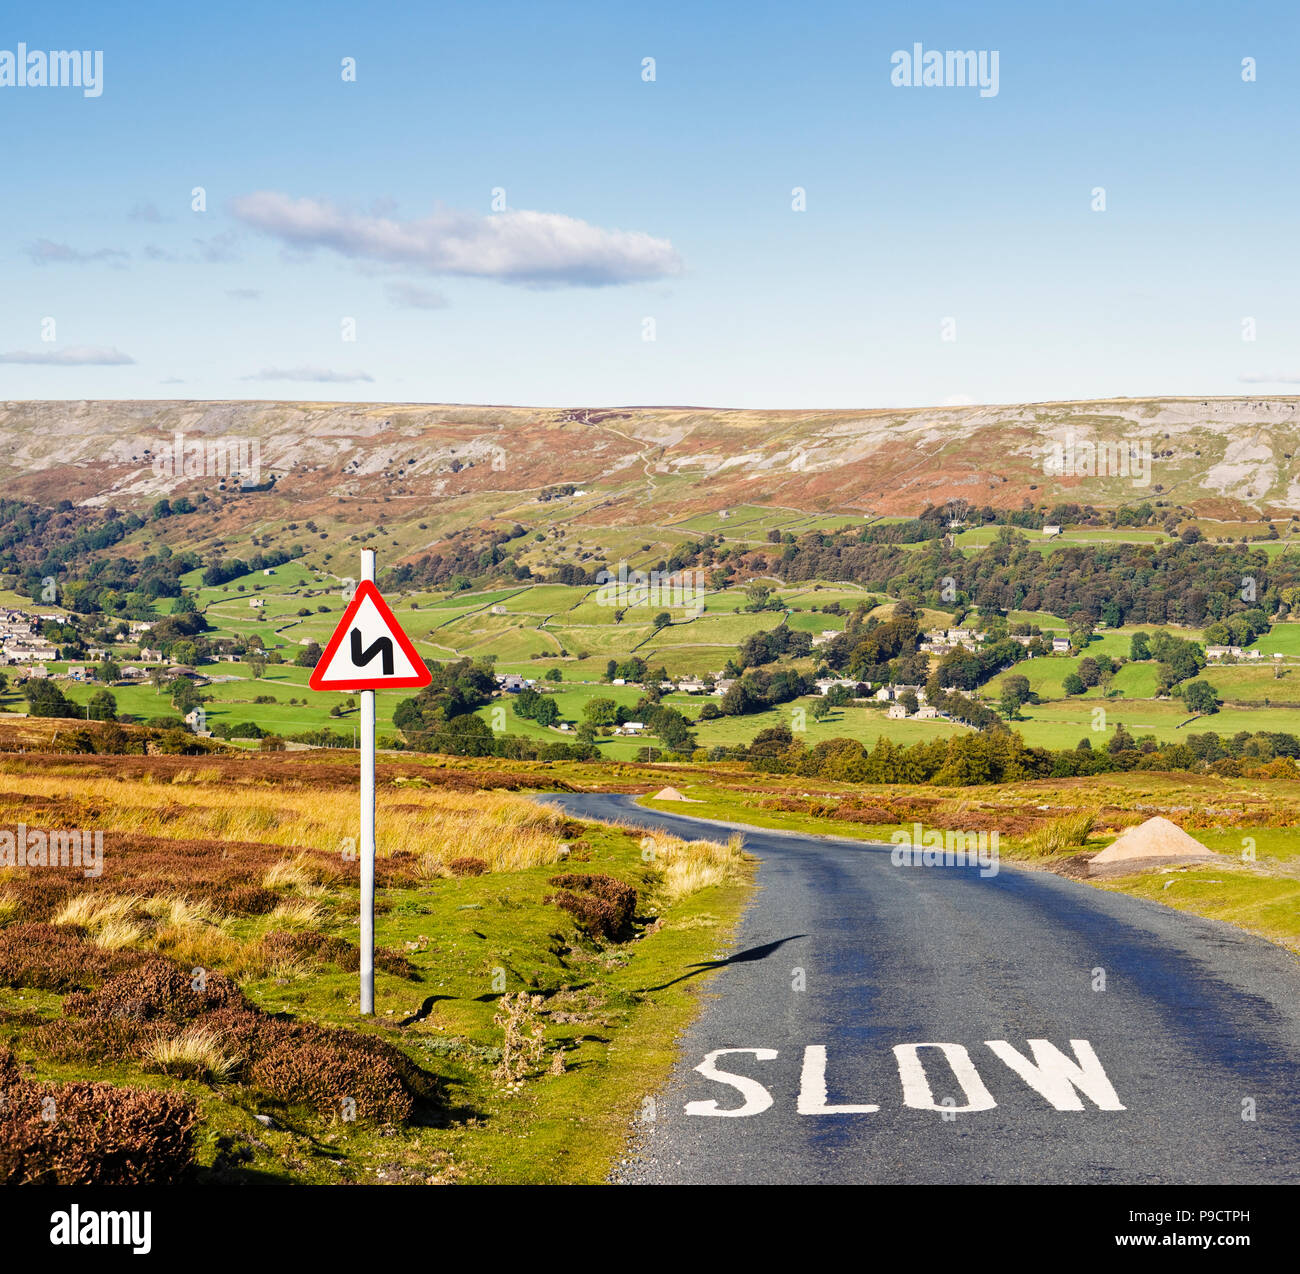 Road sign warning of dangerous bends ahead and Slow painted on the road surface, Yorkshire Dales National Park, England, UK Stock Photo